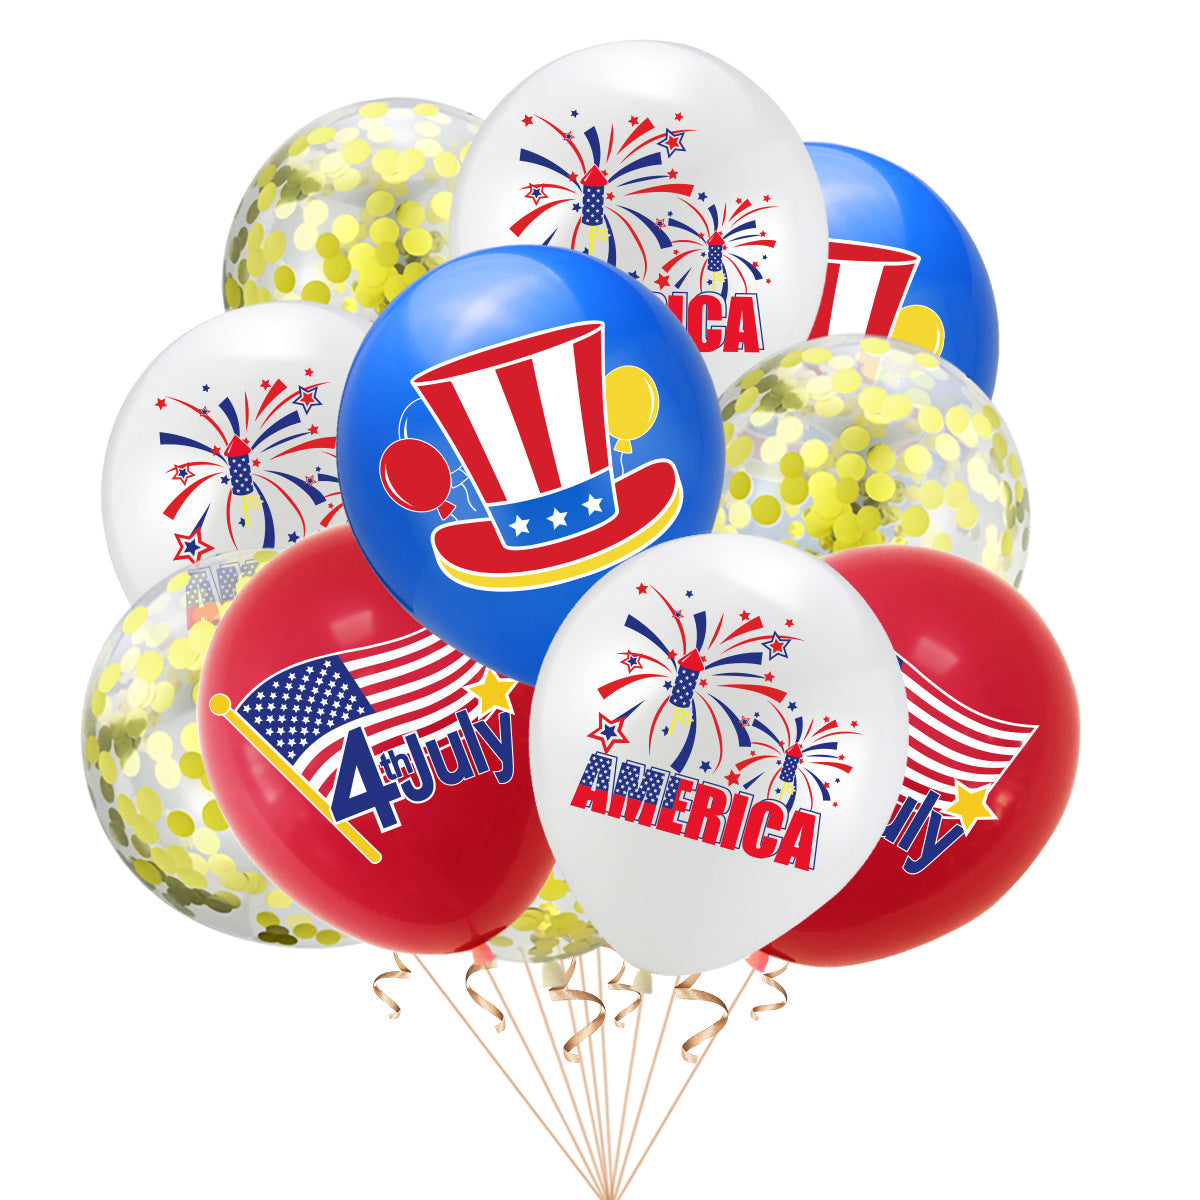 Independence Day Theme Party Decoration Supplies, 4th of July decorations, American flag decorations, Patriotic decorations, Red, white and blue decorations, July 4th wreaths, July 4th garlands, July 4th centerpieces, Fireworks decorations, July 4th banners, July 4th streamers, July 4th balloons, July 4th table runners, July 4th tablecloths, July 4th lights, July 4th outdoor decorations, Patriotic yard stakes, 